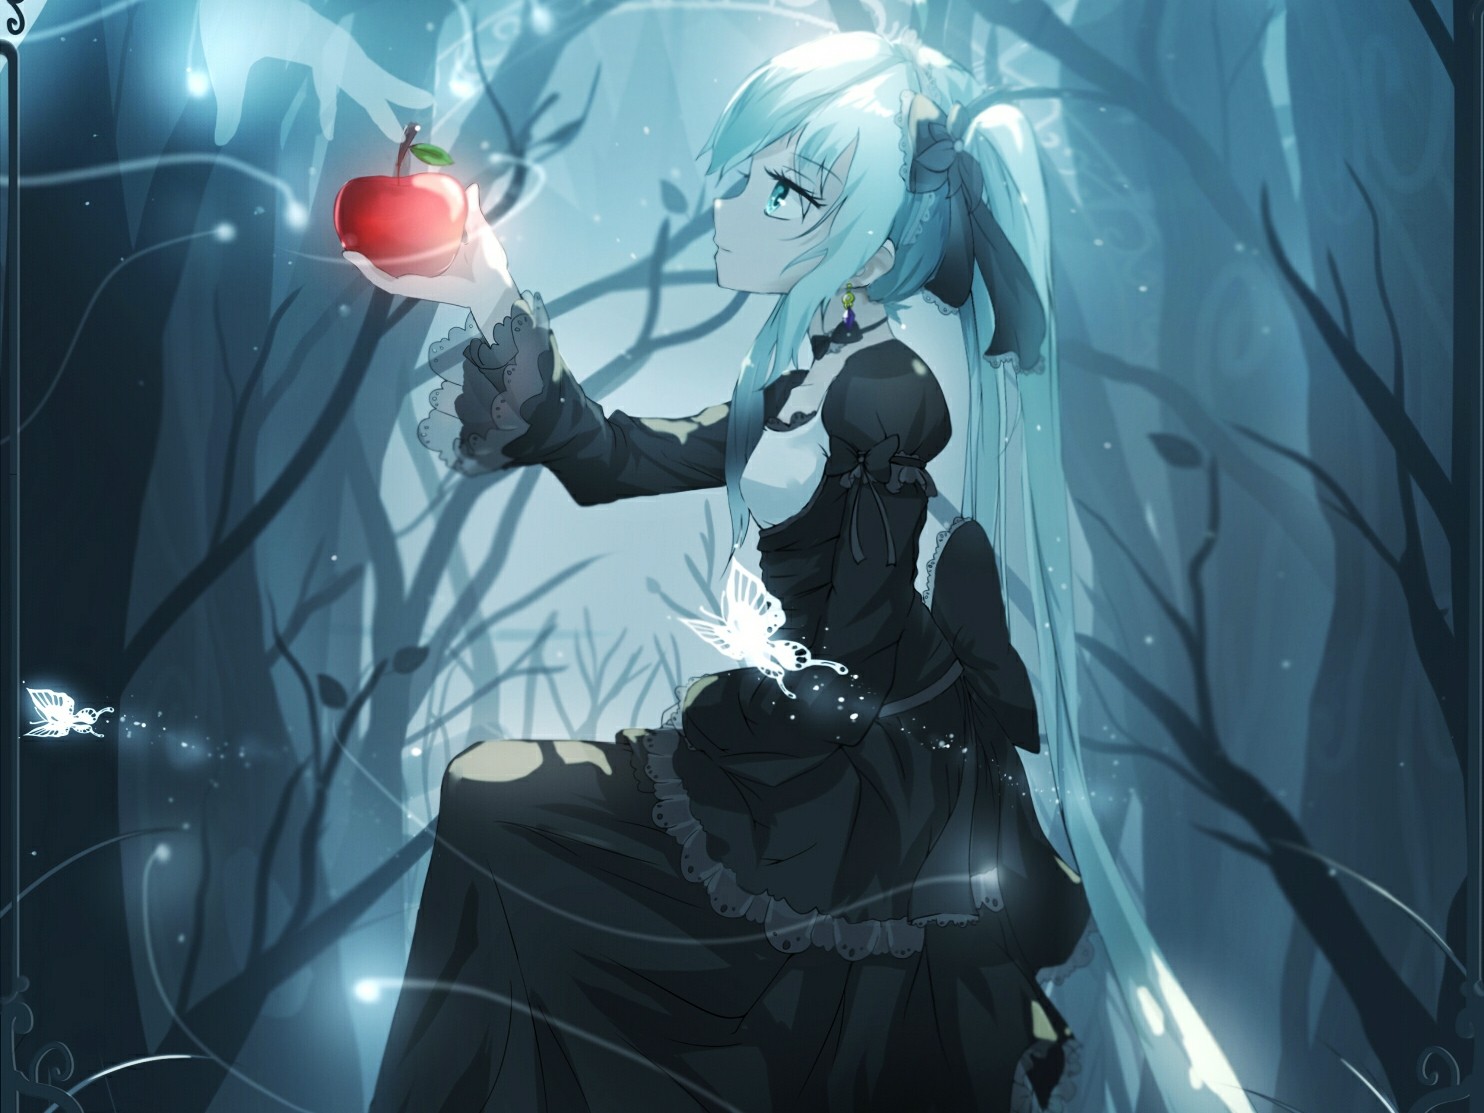 Apples Anime Girls Forest Clearing Vocaloid Hatsune Miku 1484x1113